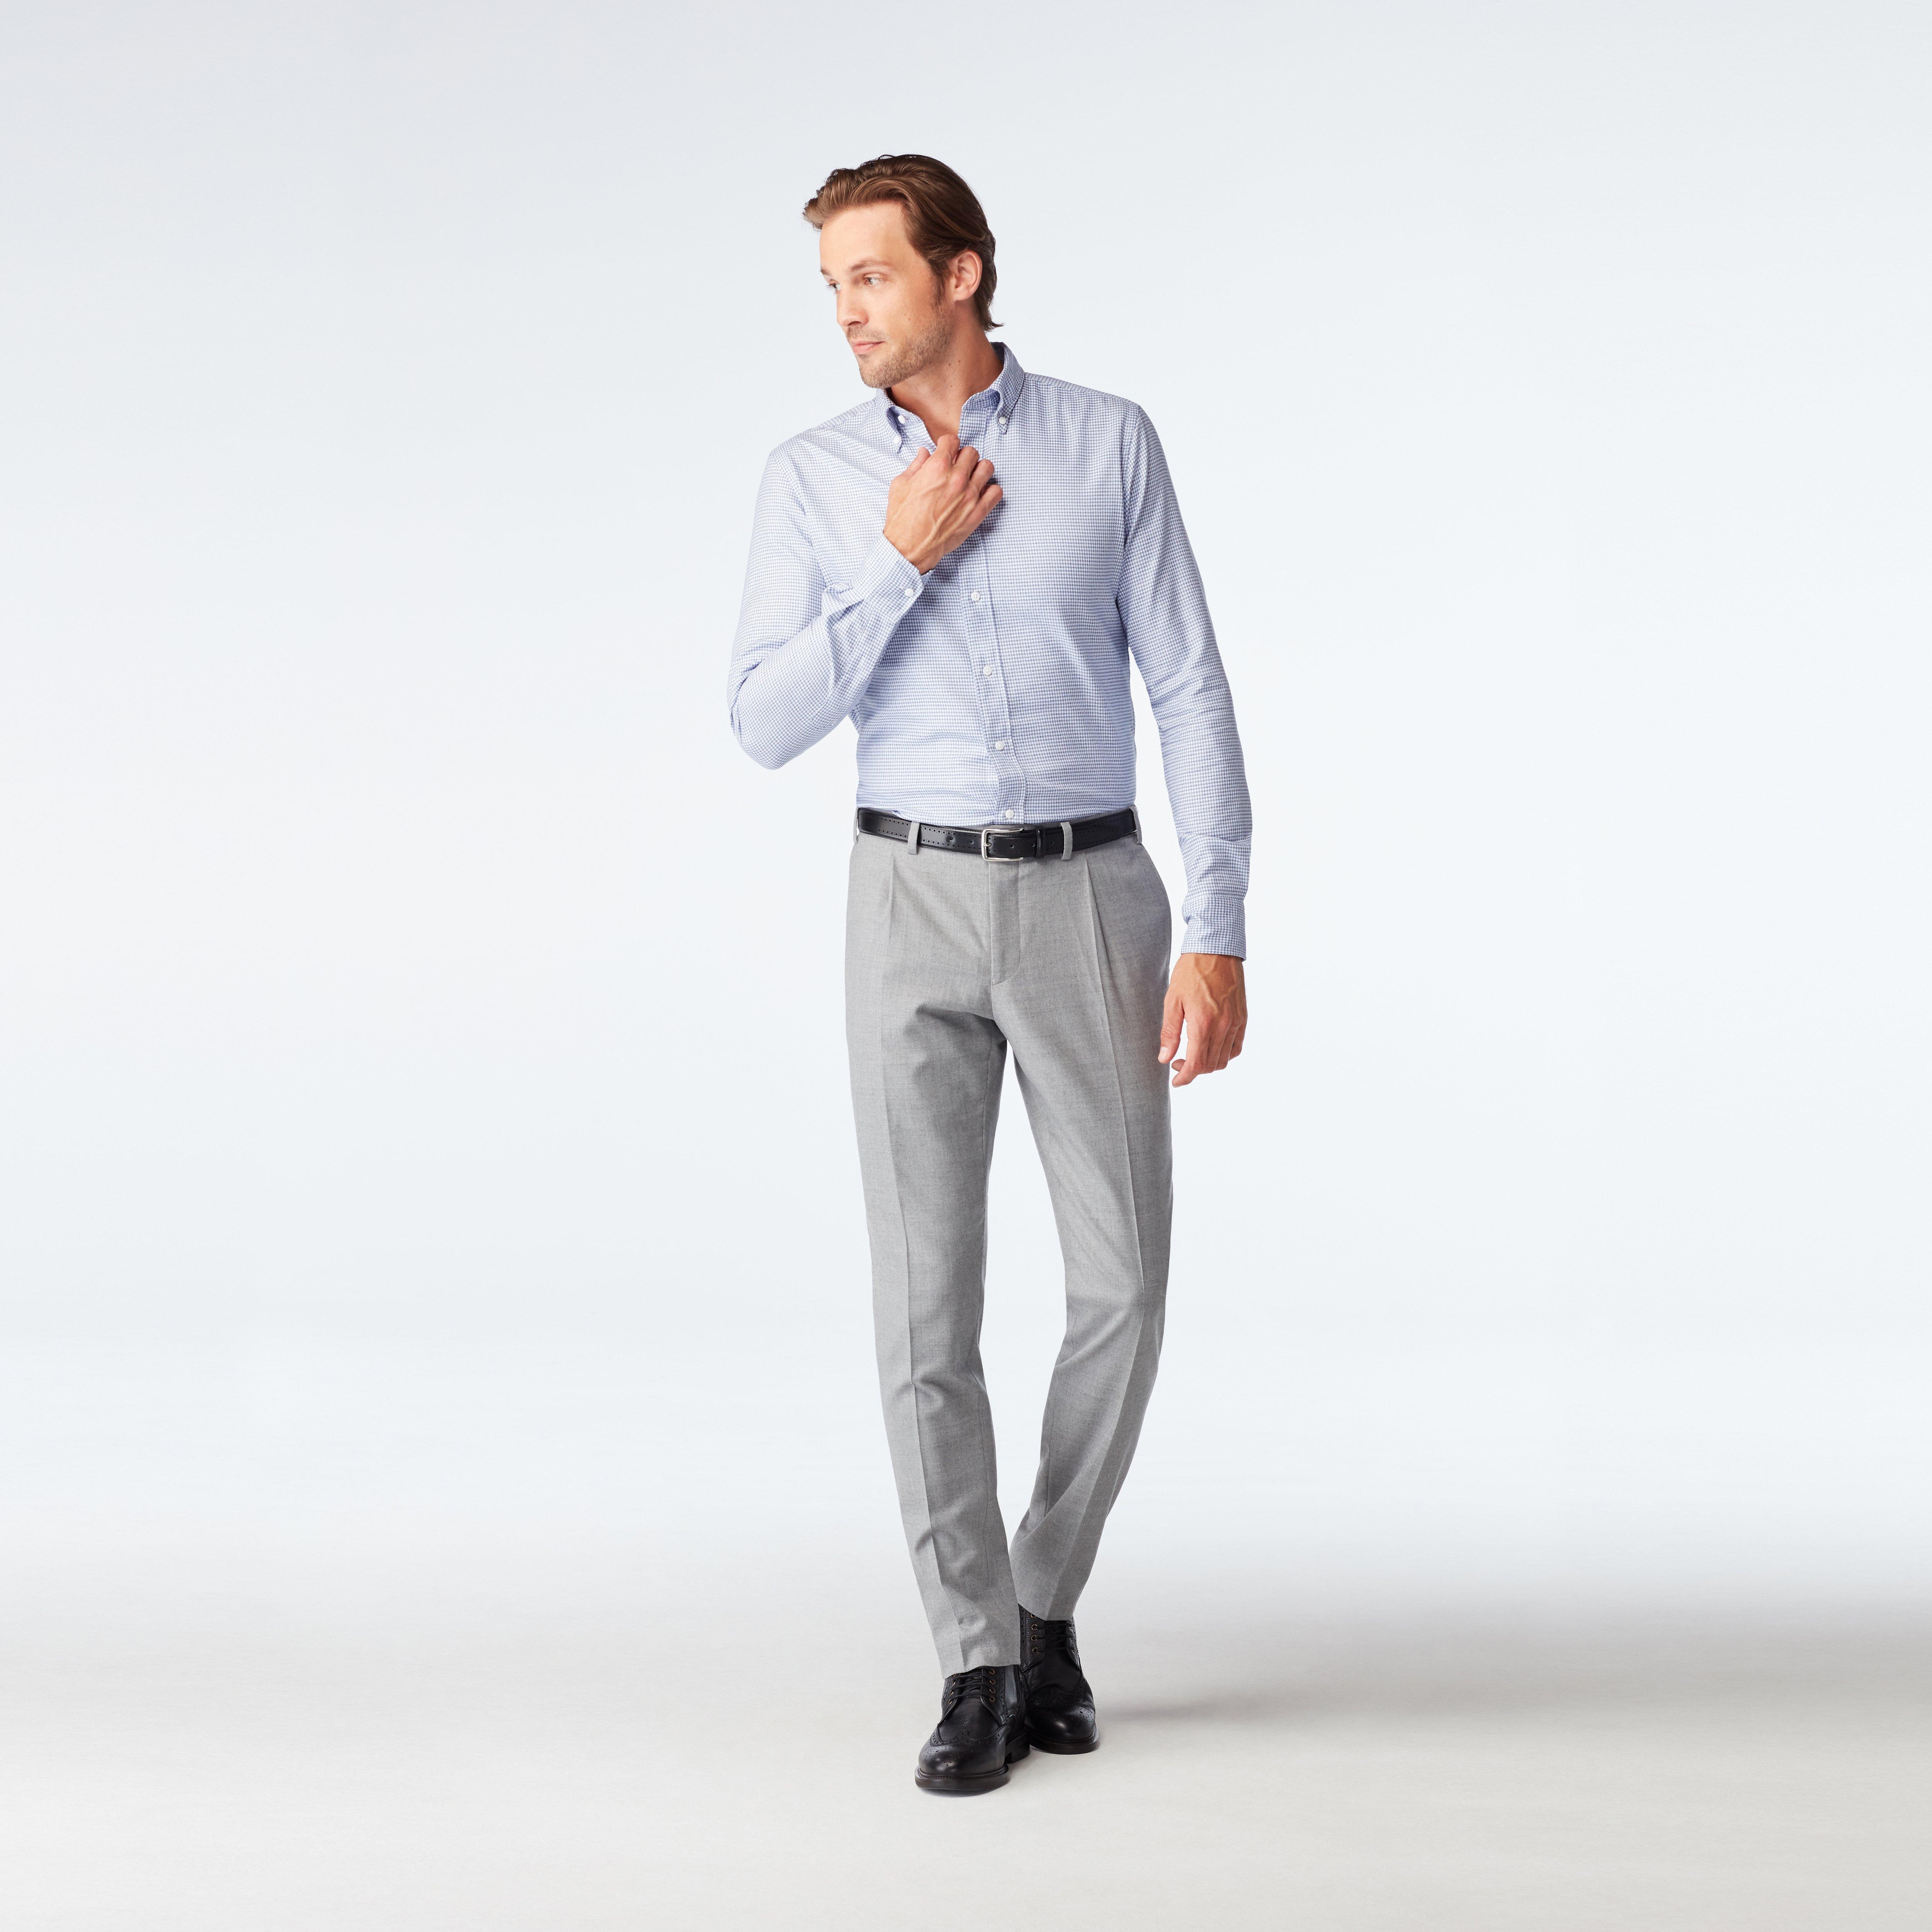 Custom Pants Made For You - Hayward Flannel Light Gray Pants | INDOCHINO